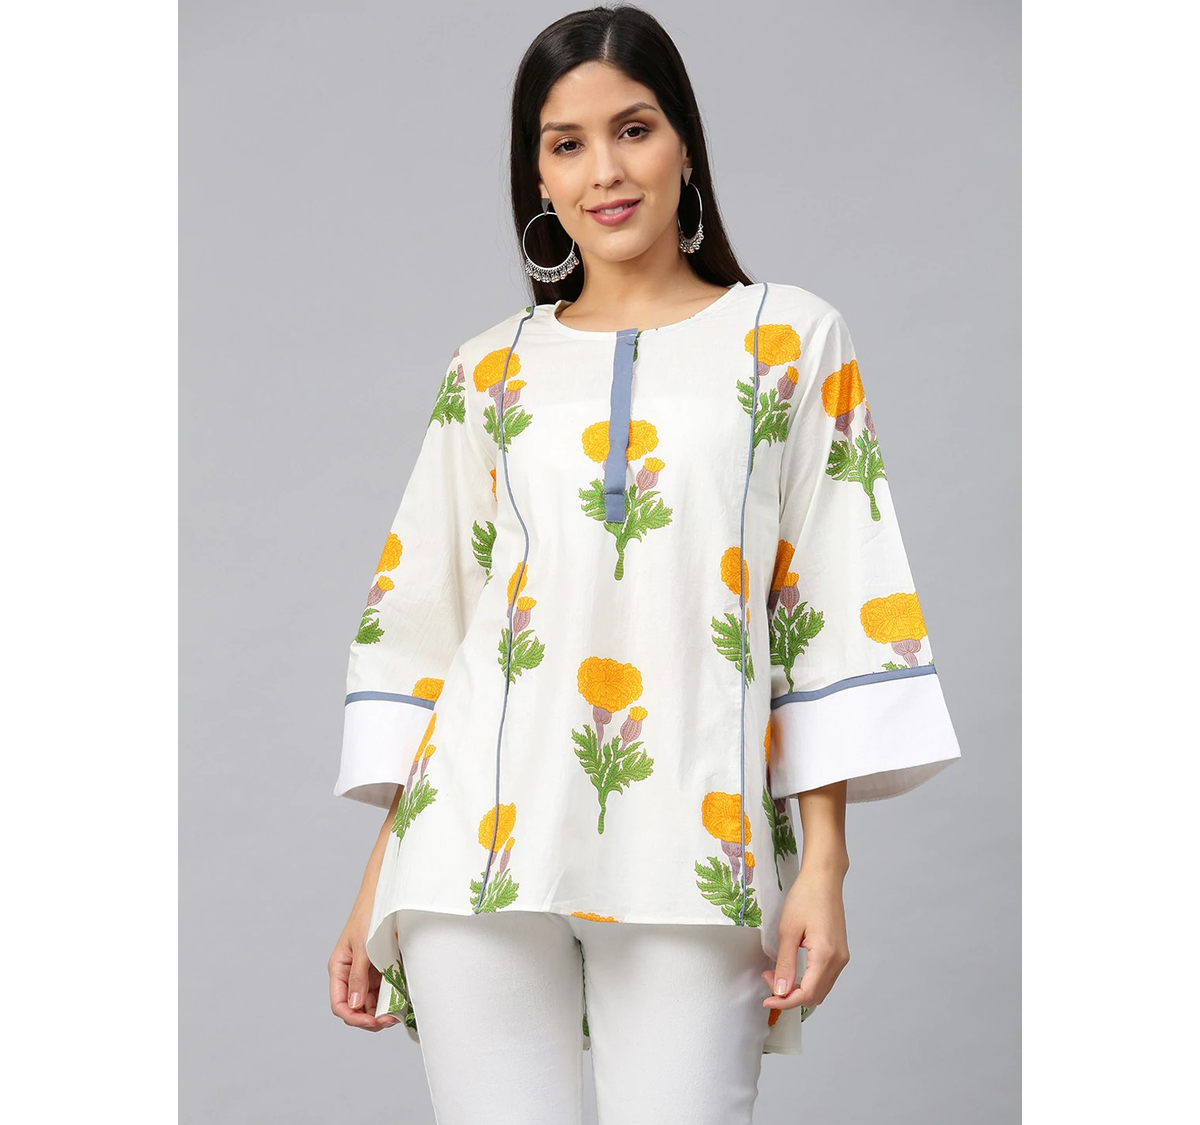 Women's  Off-White & Yellow Printed A-Line High-Low Kurti - Wahe-NOOR